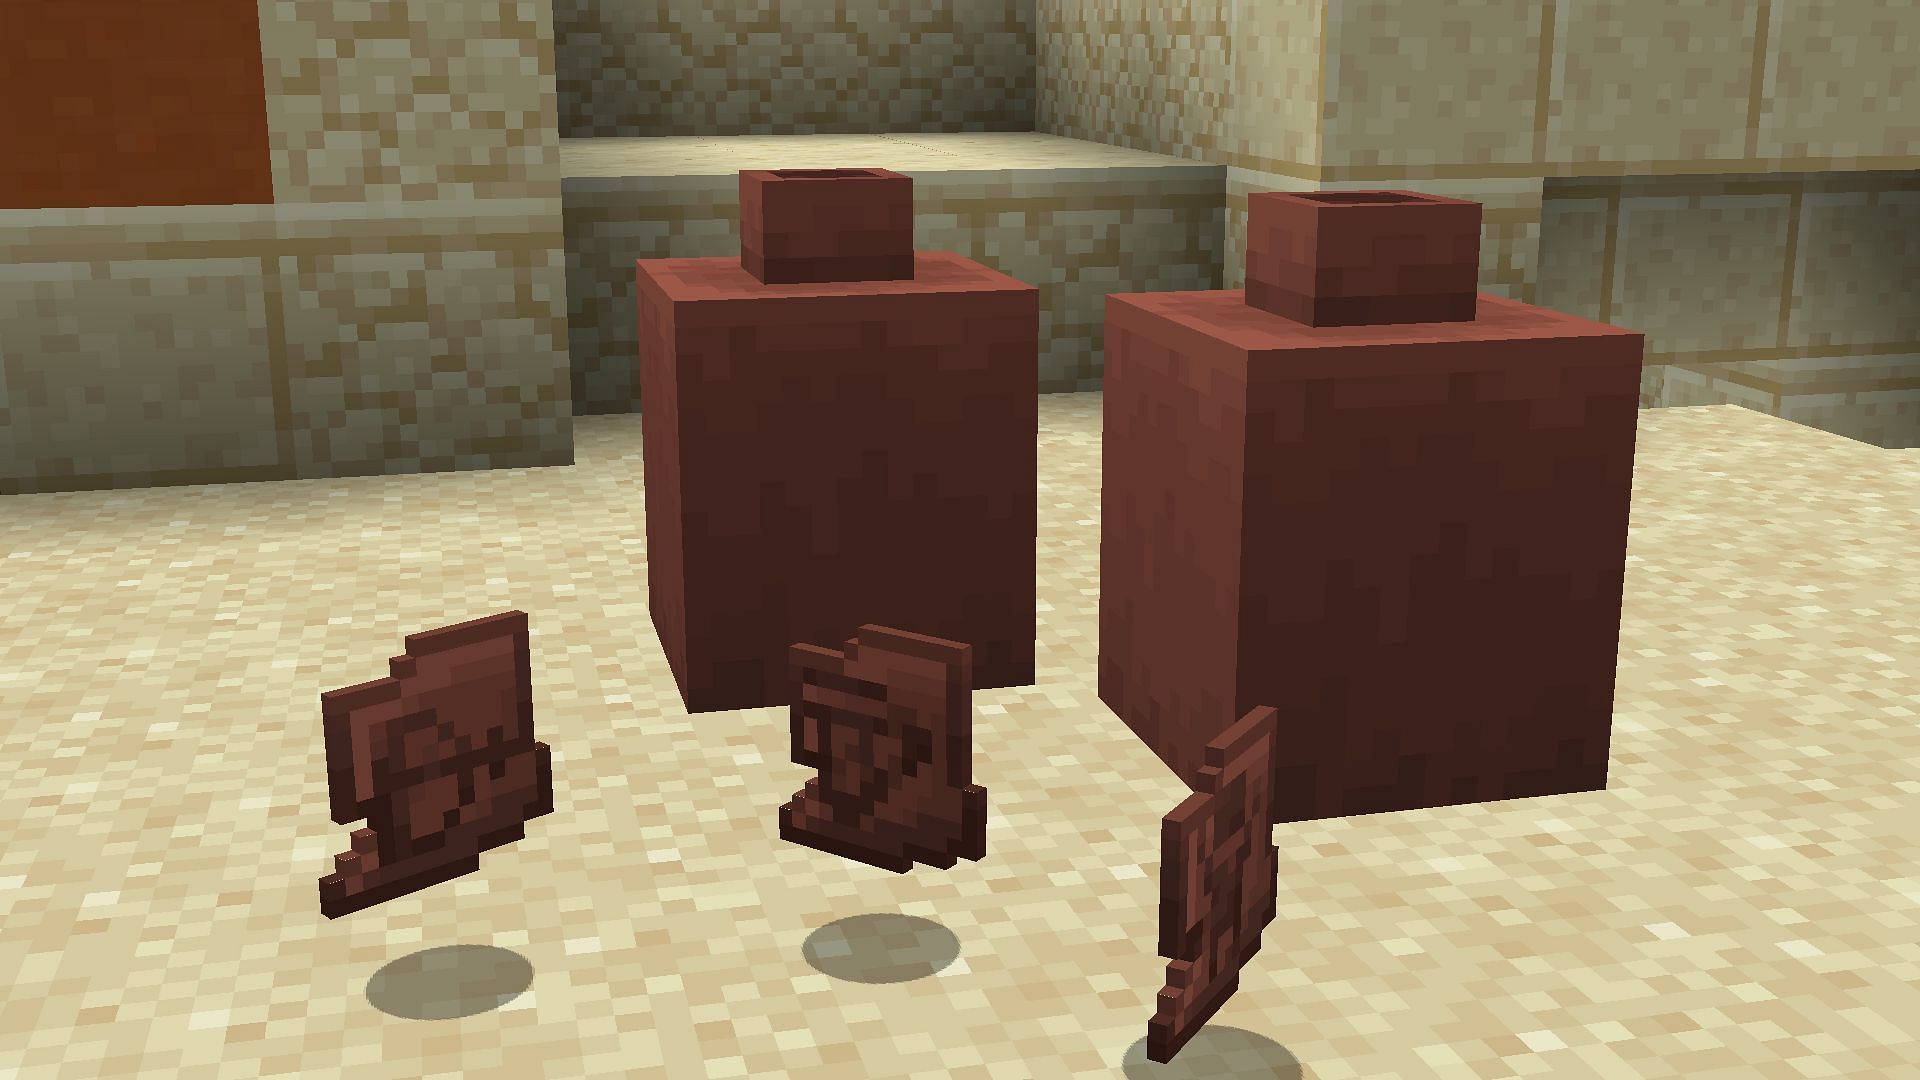 Pottery shards are new items found in suspicious sand that can be crafted into decorated pots in Minecraft 1.20 update (Image via Mojang)